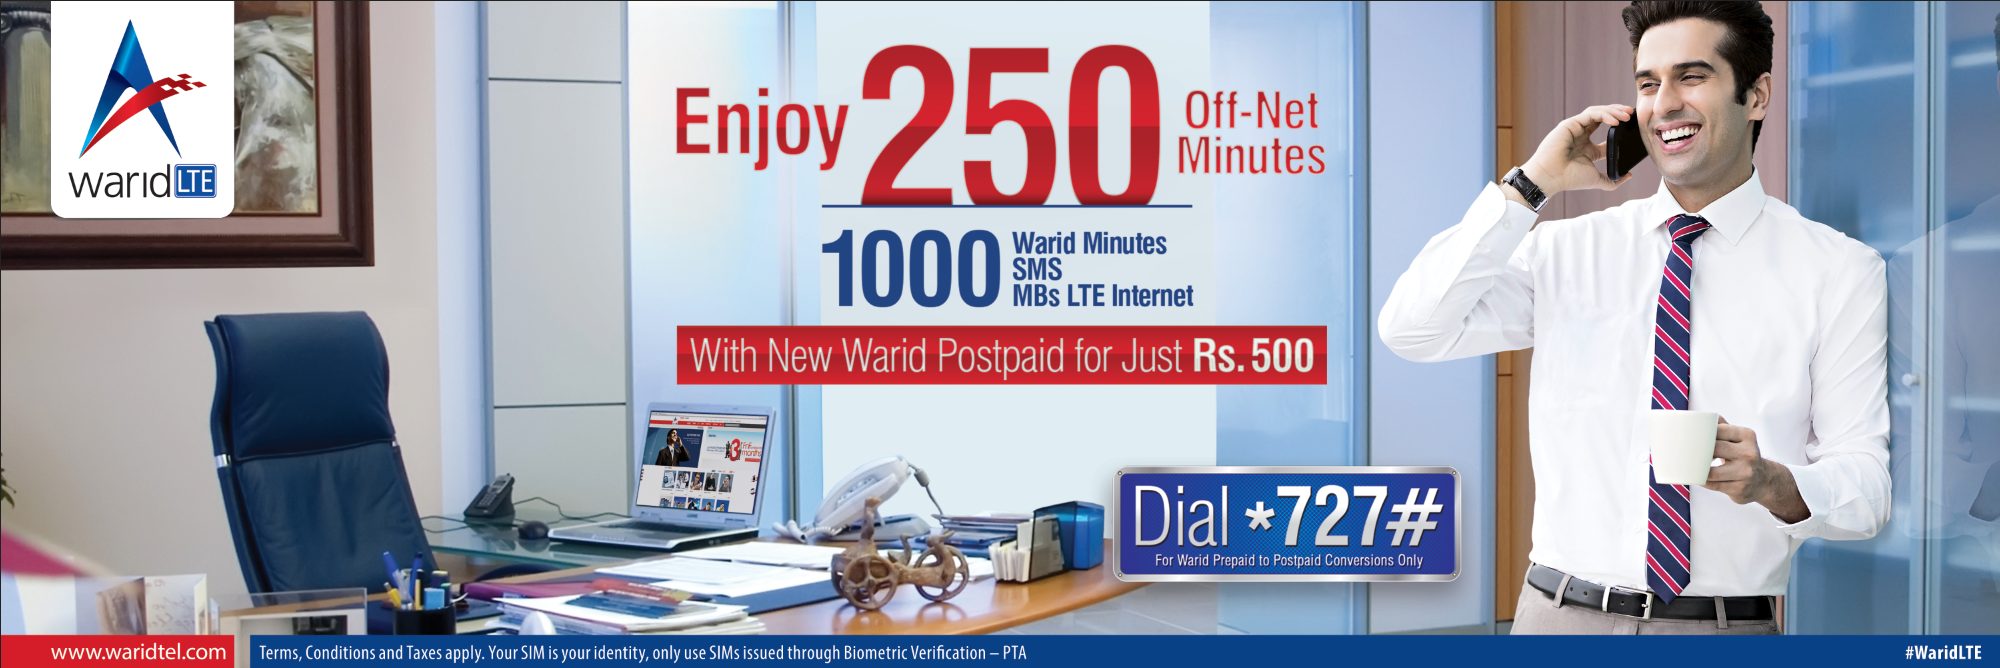 Warid Launches New Bundles for its New Customers